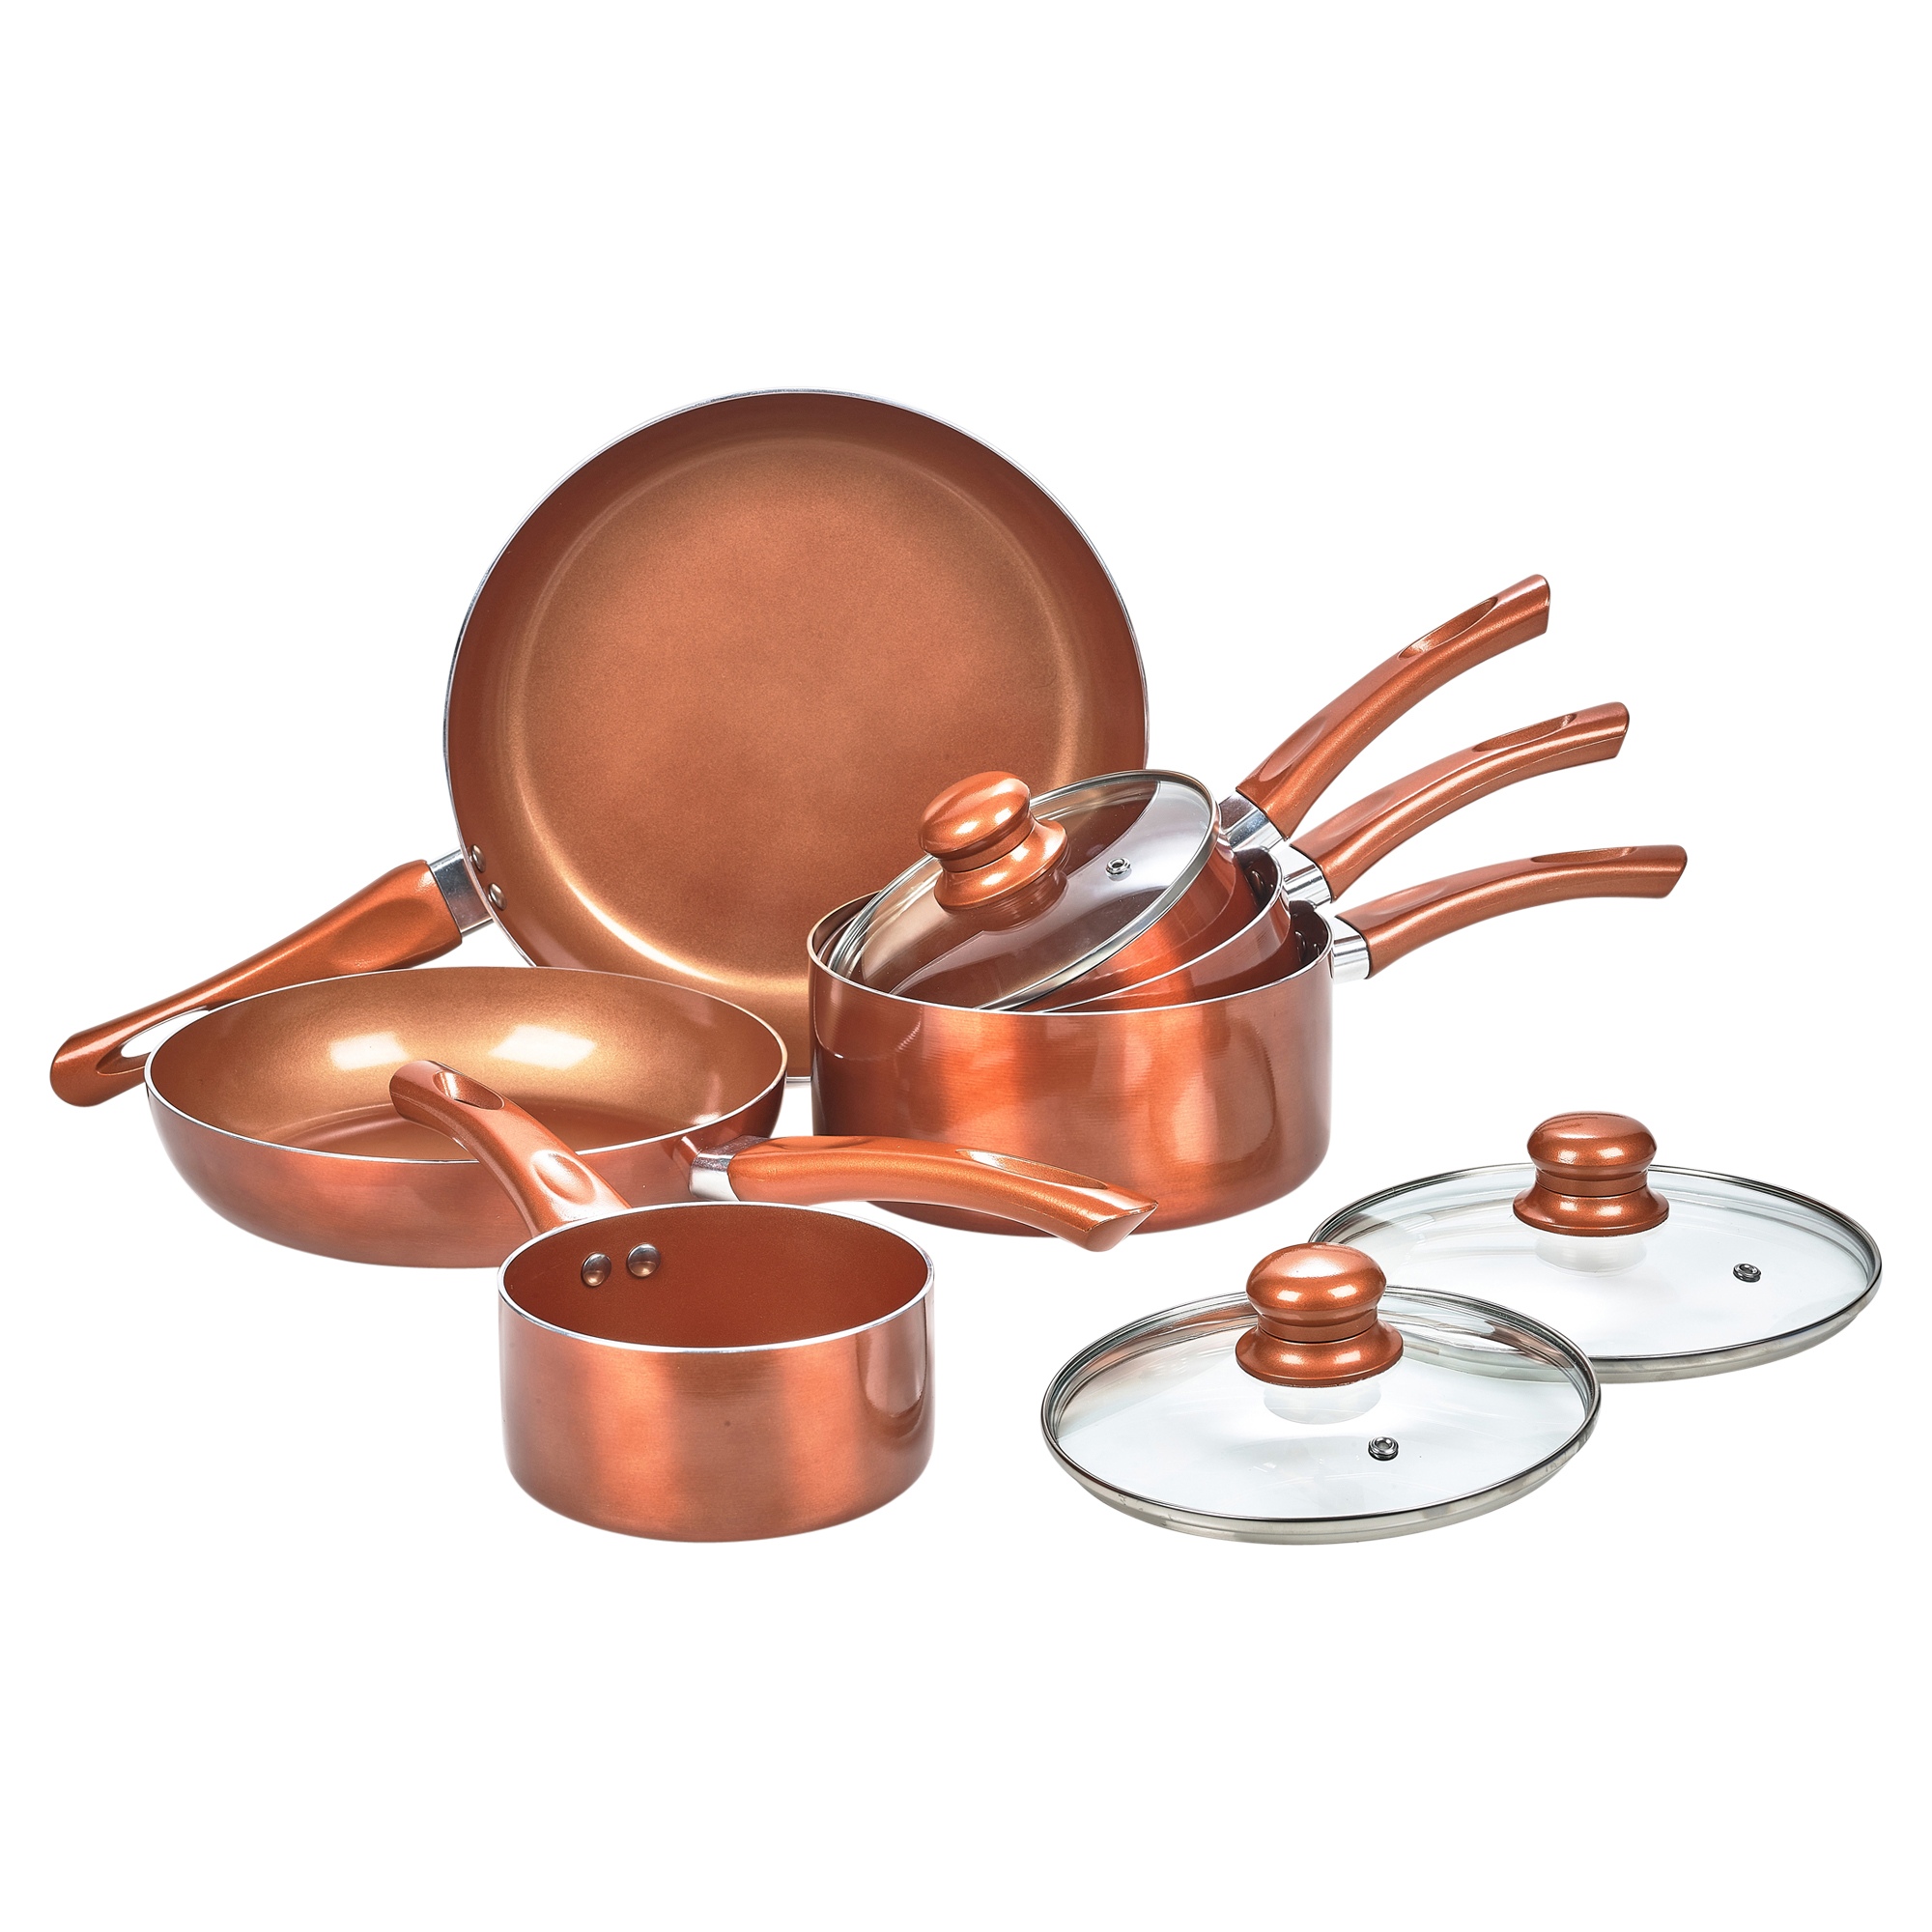 https://www.easygiftproducts.co.uk/56942/6-pcs-urbn-chef-cookware-set.jpg